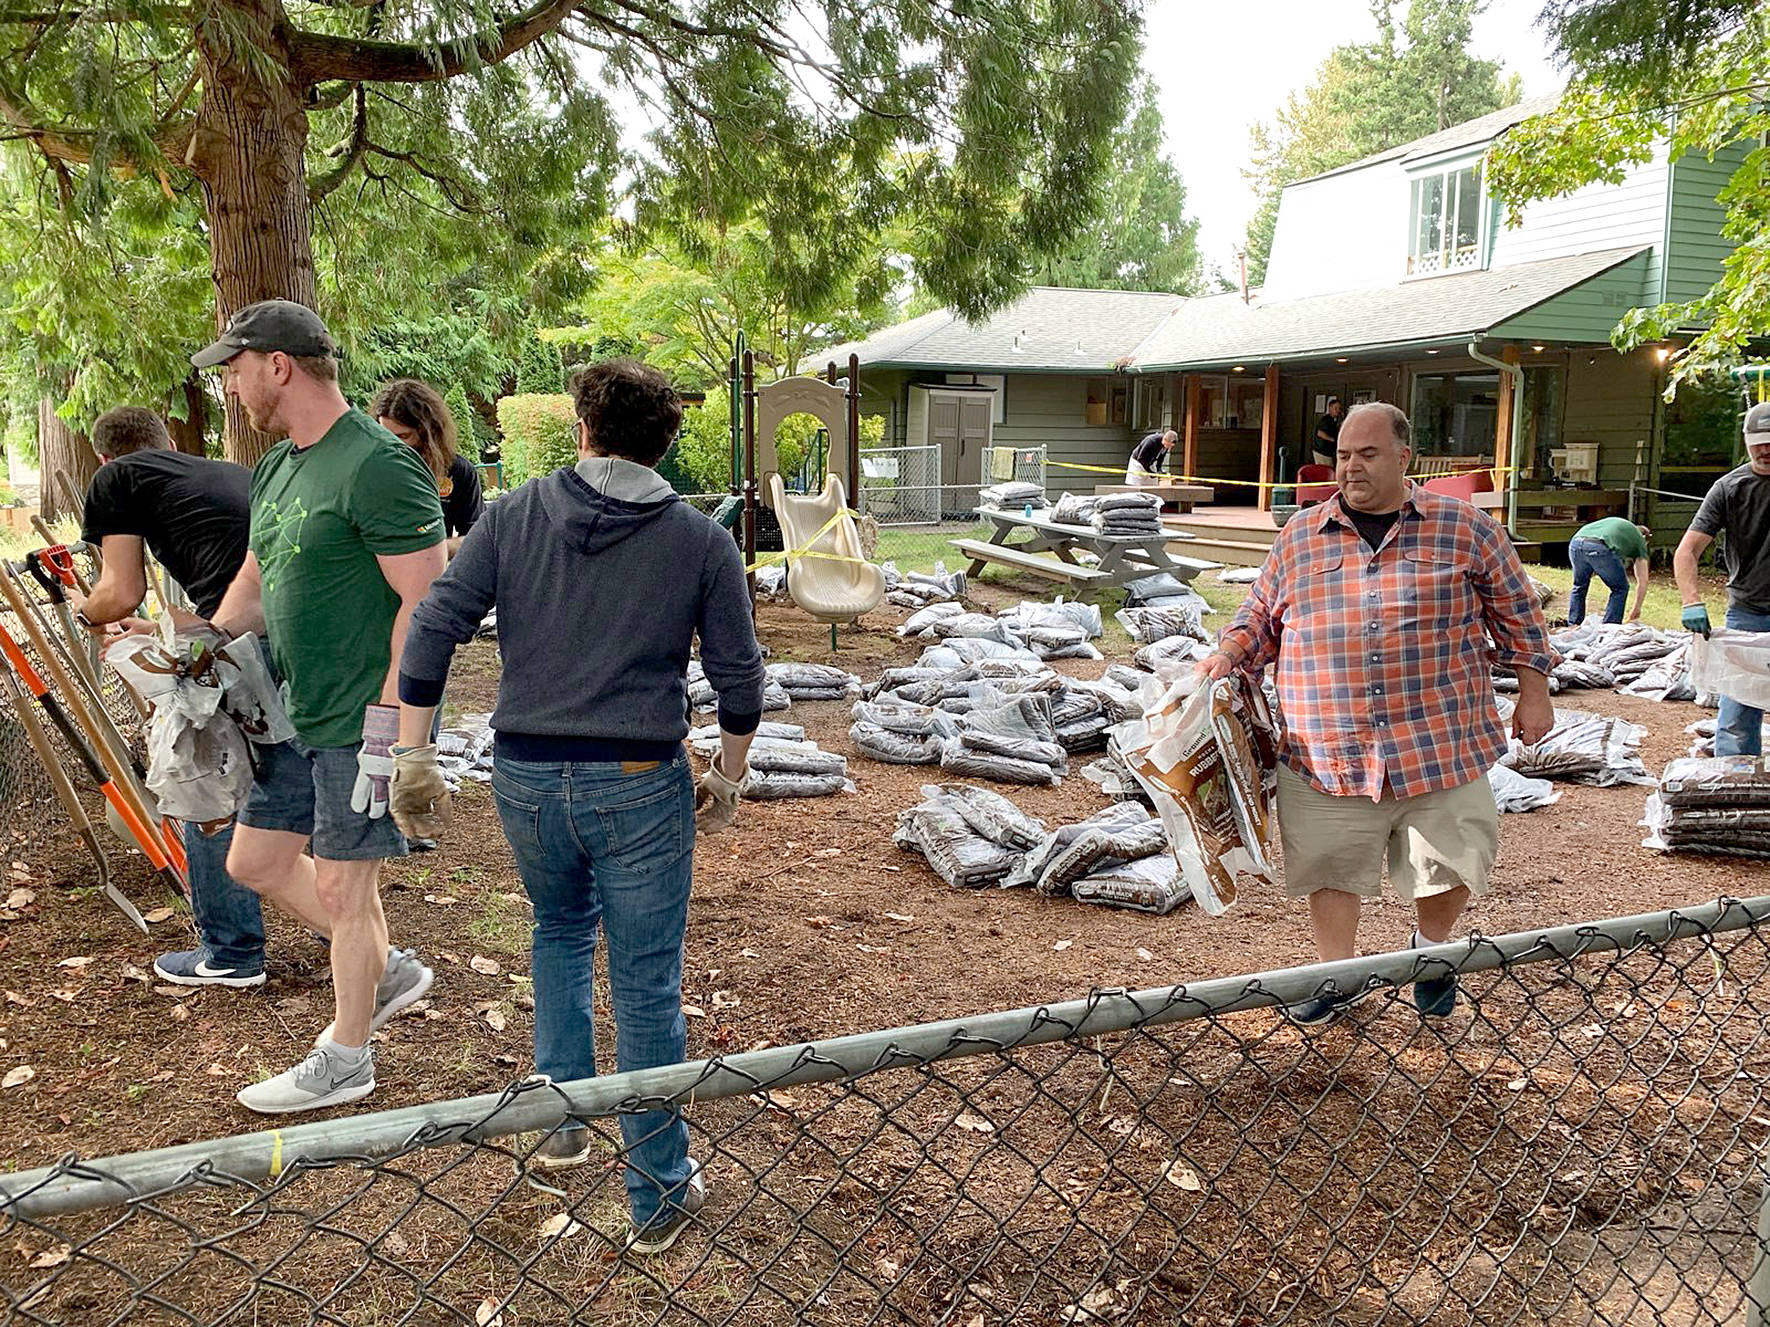 Volunteers help paint and fix up apartments and shelters provided to domestic violence victims by DAWN during King County’s Day of Caring on Sept. 13, 2019. Photo courtesy of DAWN.